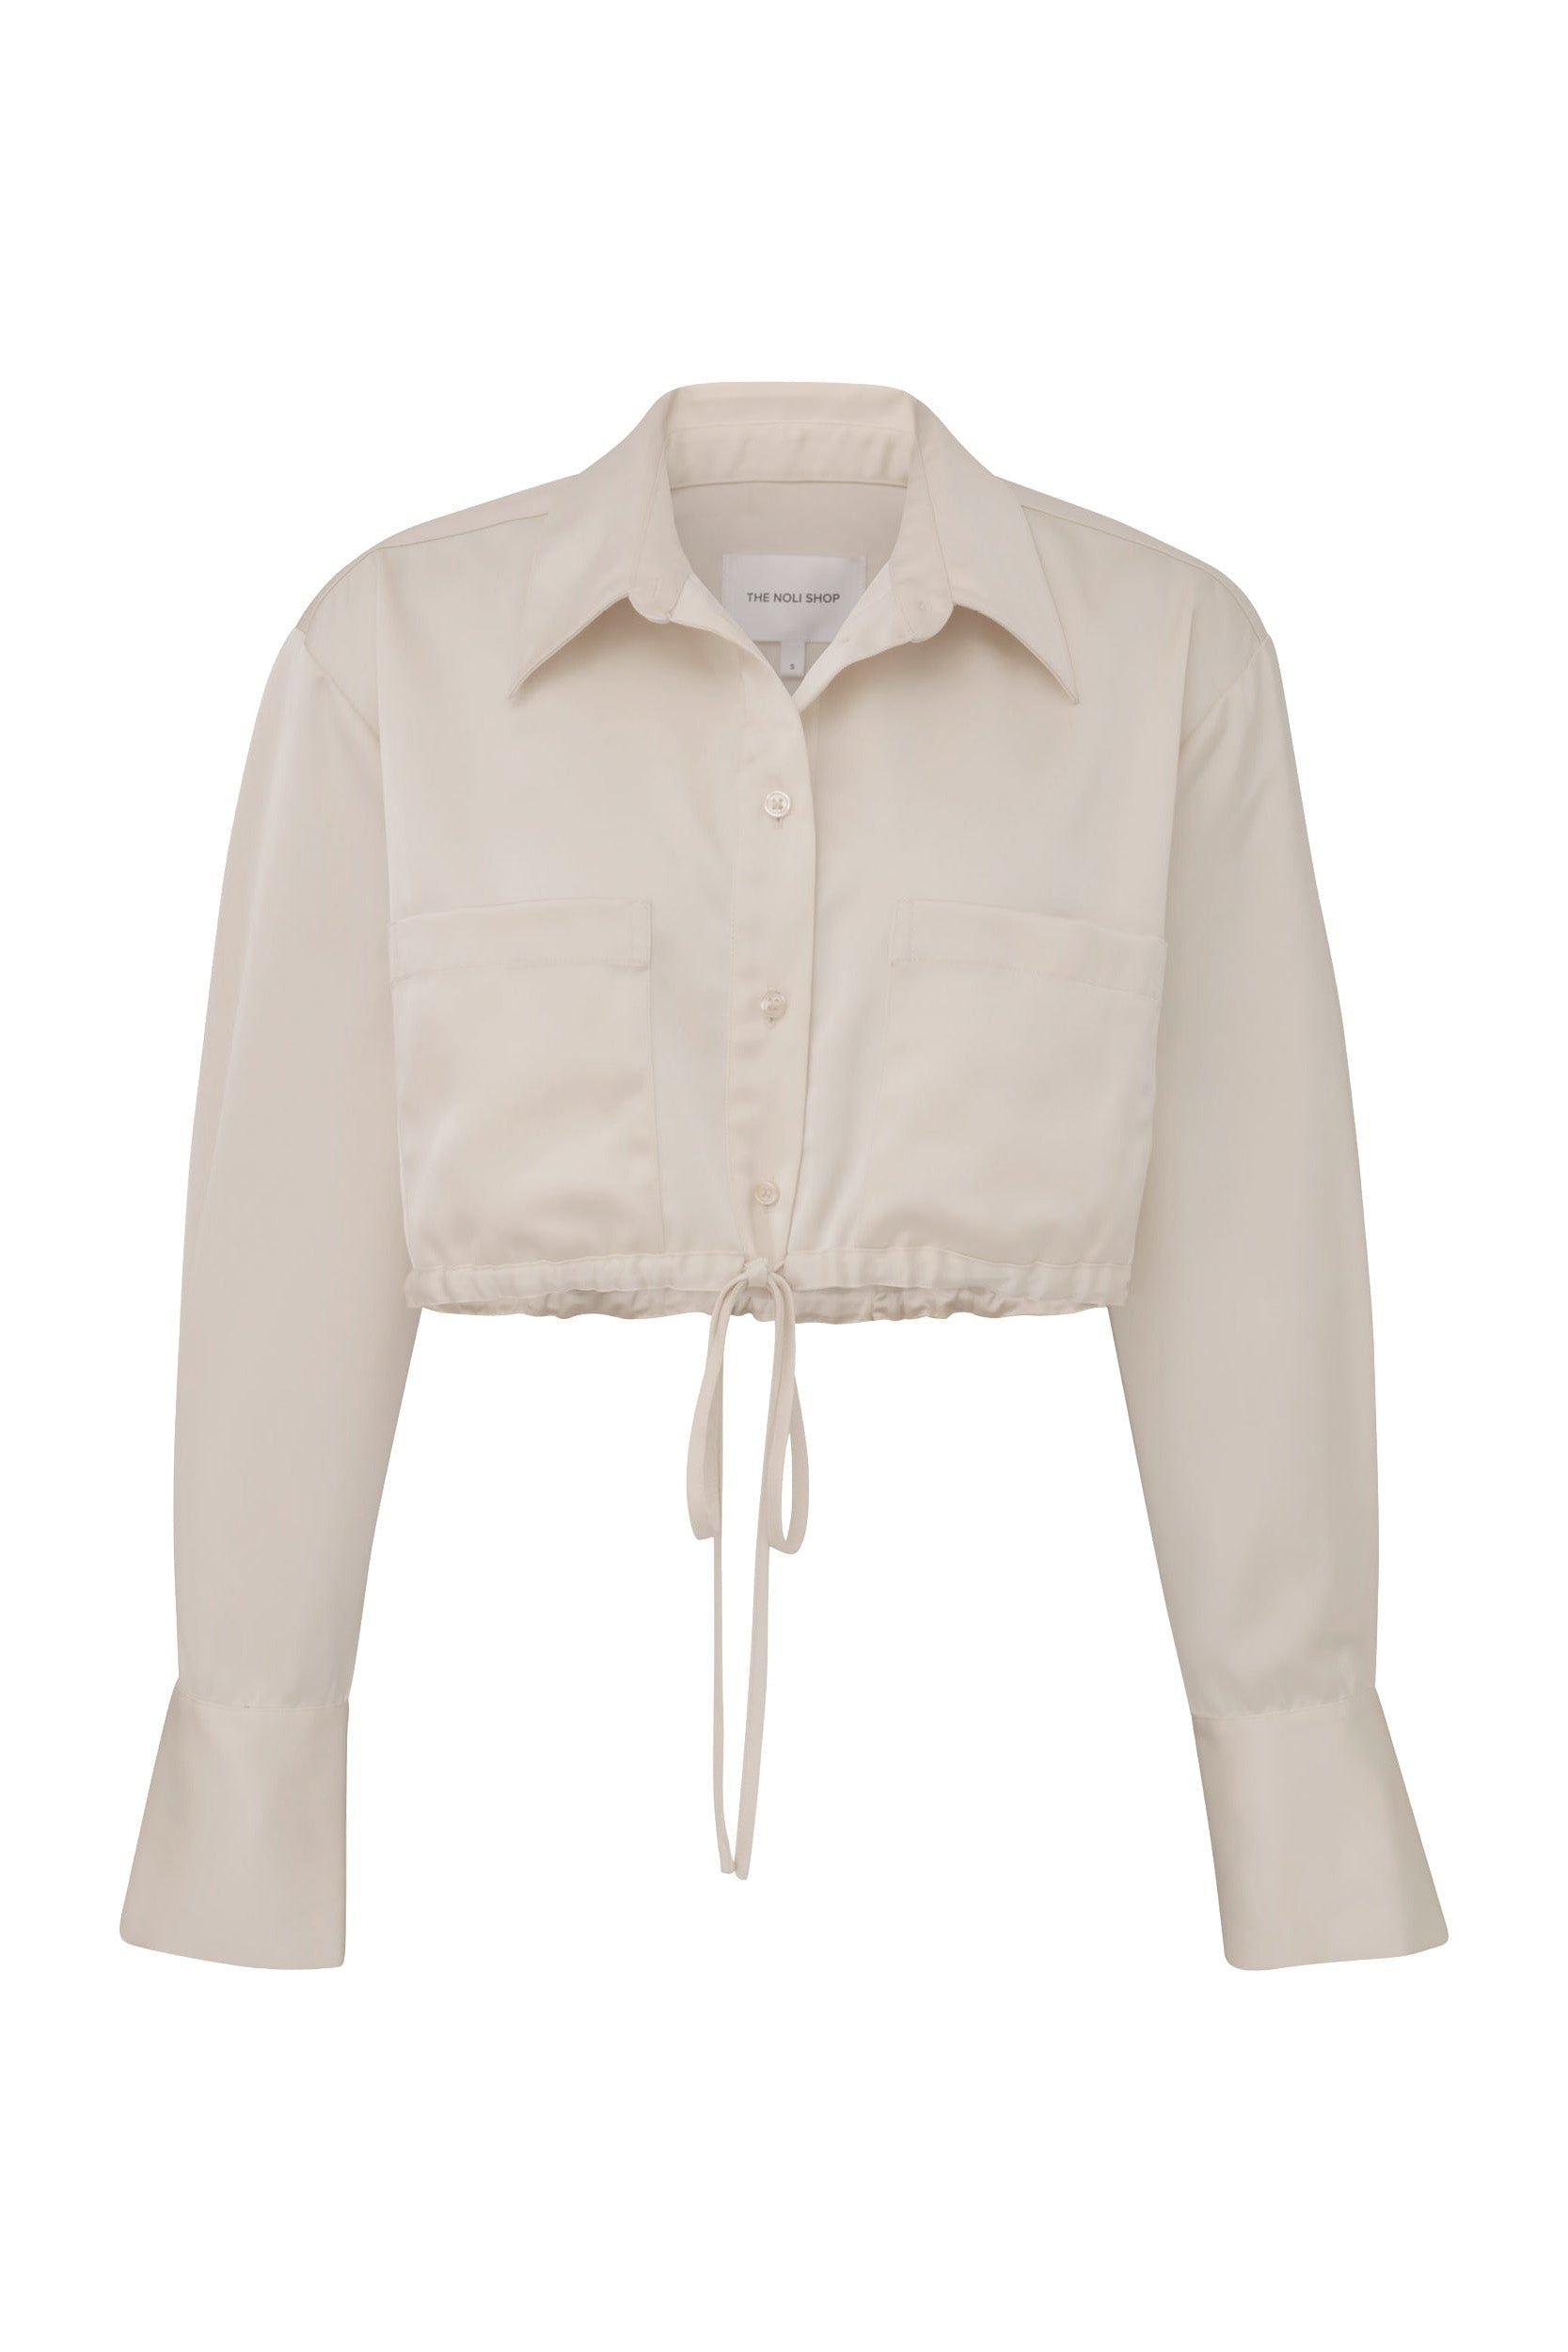 Introducing the Milan Satin Button Up in Pearl: an off-white, long-sleeve cropped blouse featuring a button-down front and two chest pockets with cargo detailing. This satin design includes a pointed collar, wide cuffs, and a tie-waist for an adjustable fit.